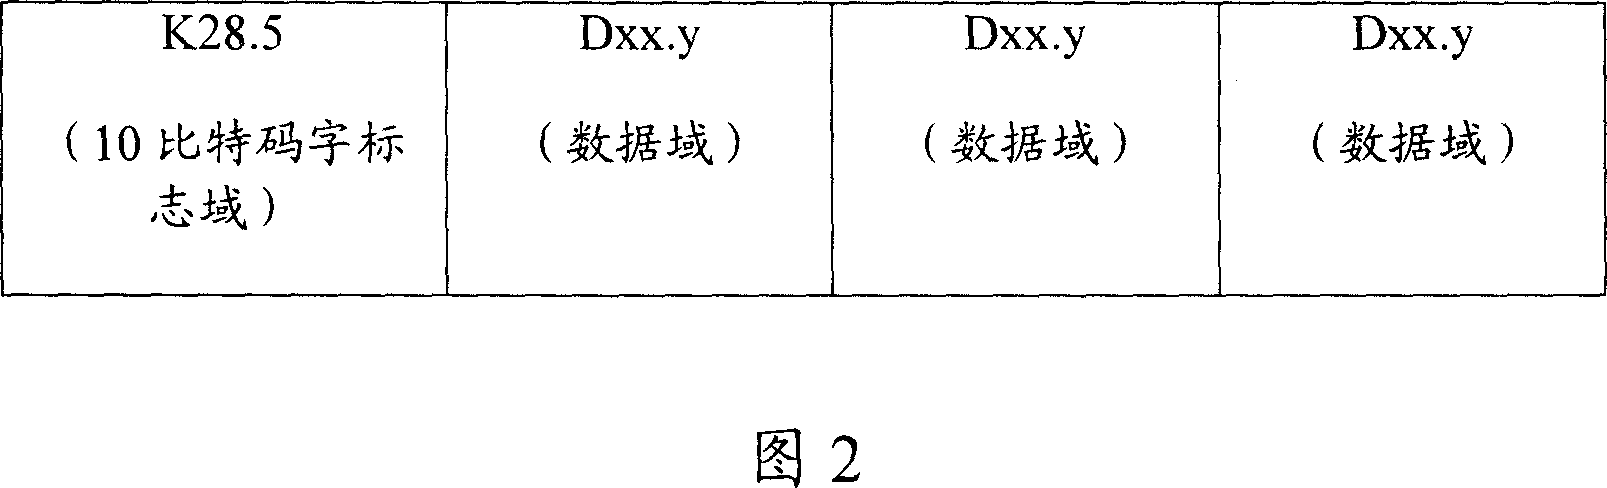 Method for transmitting FC frame and package exchanging network and its node using the method